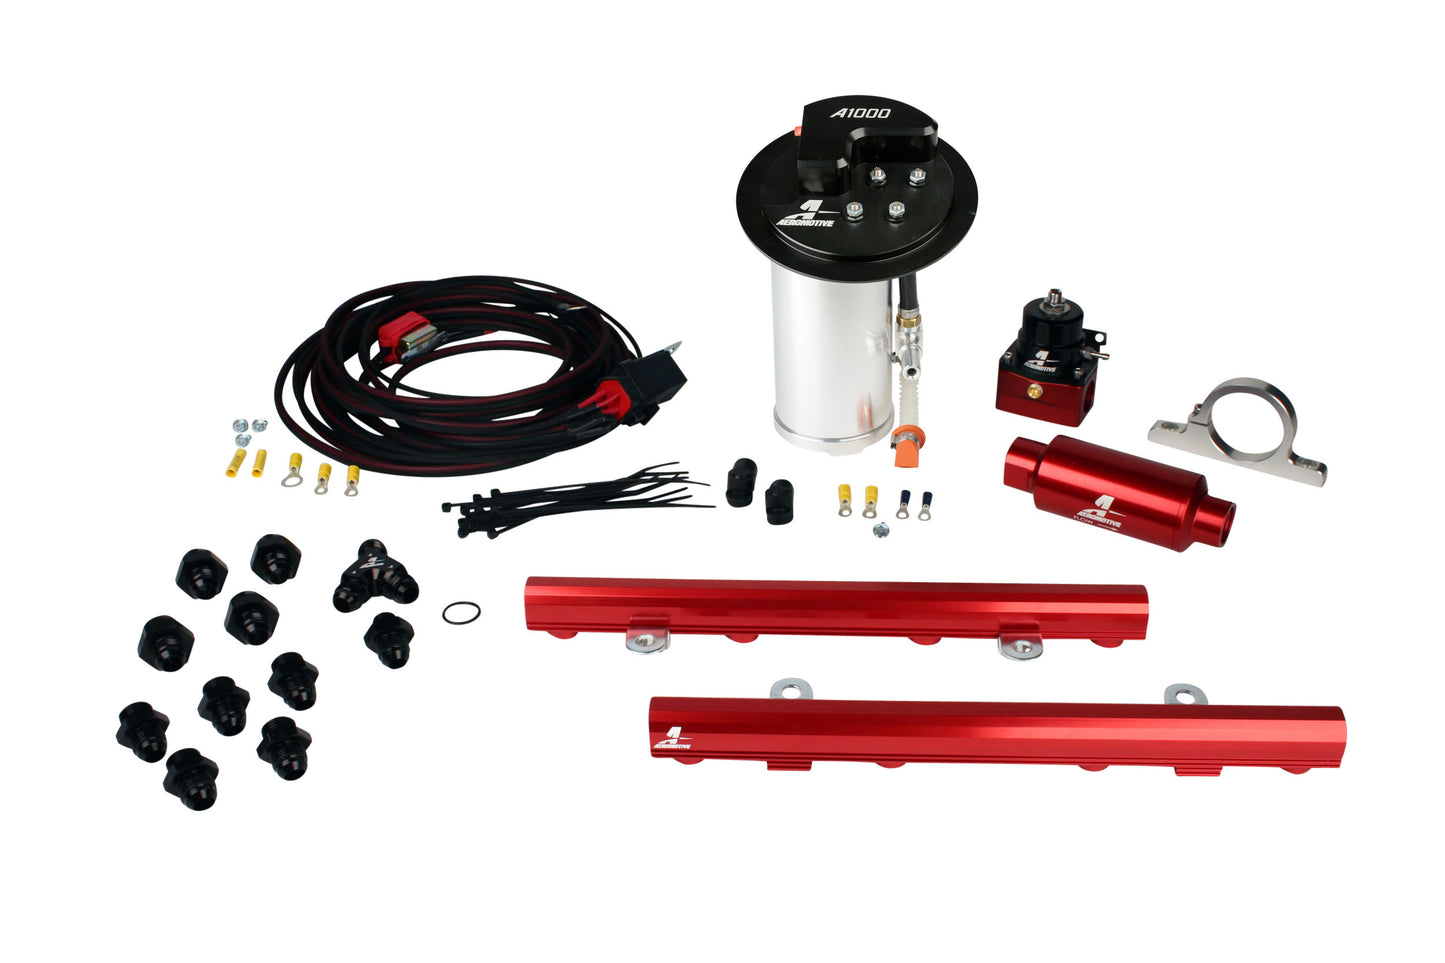 10-17 Mustang GT Stealth A1000 Race Fuel System with 5.0L 4-V Fuel Rails